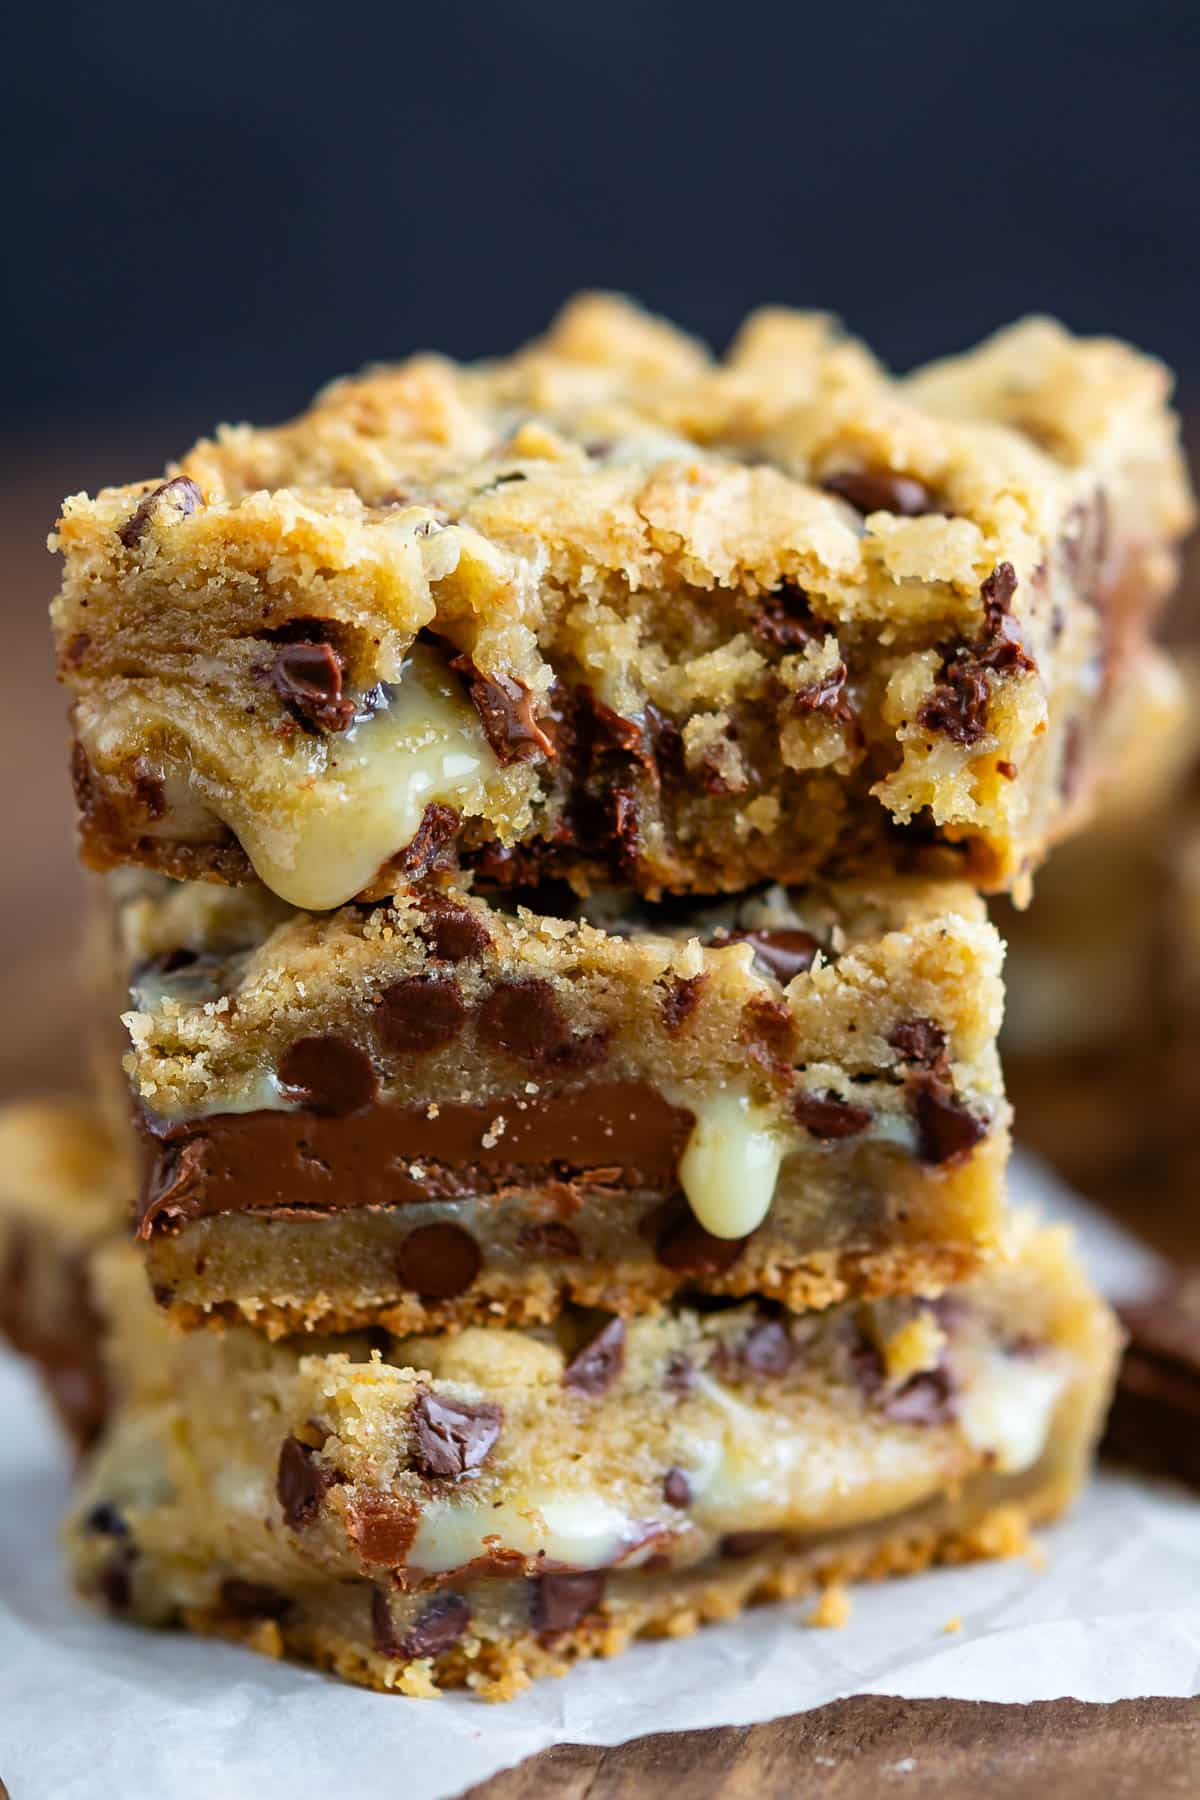 stacked gooey bars with chocolate chips baked into the center.